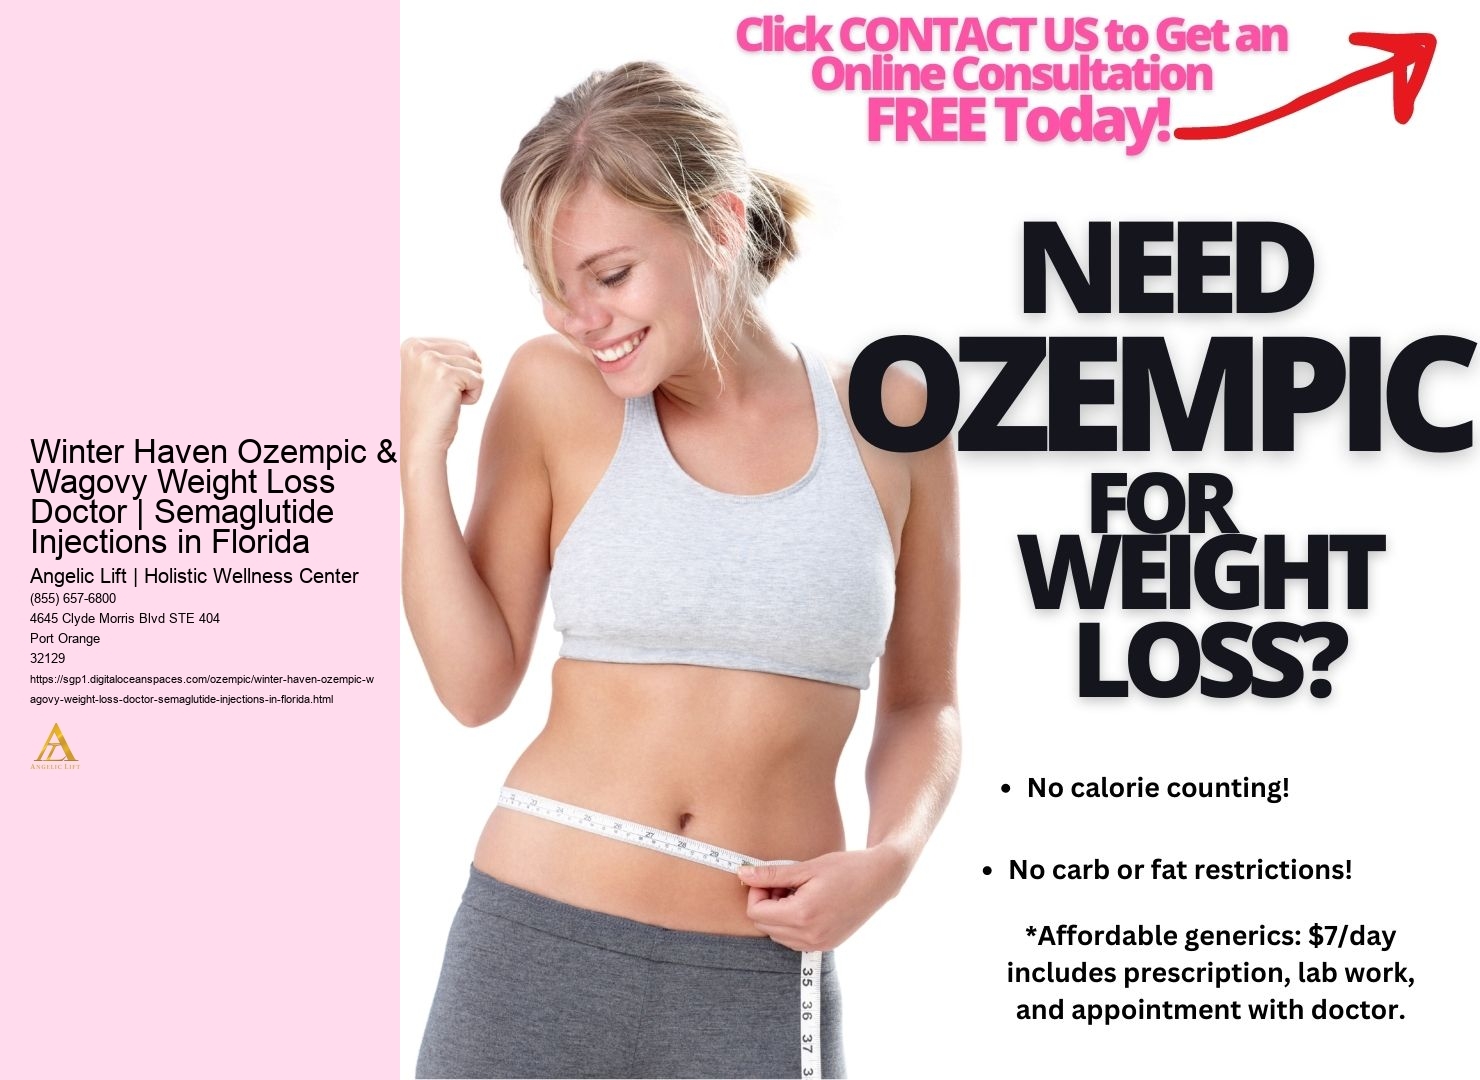 Winter Haven Ozempic & Wagovy Weight Loss Doctor | Semaglutide Injections in Florida